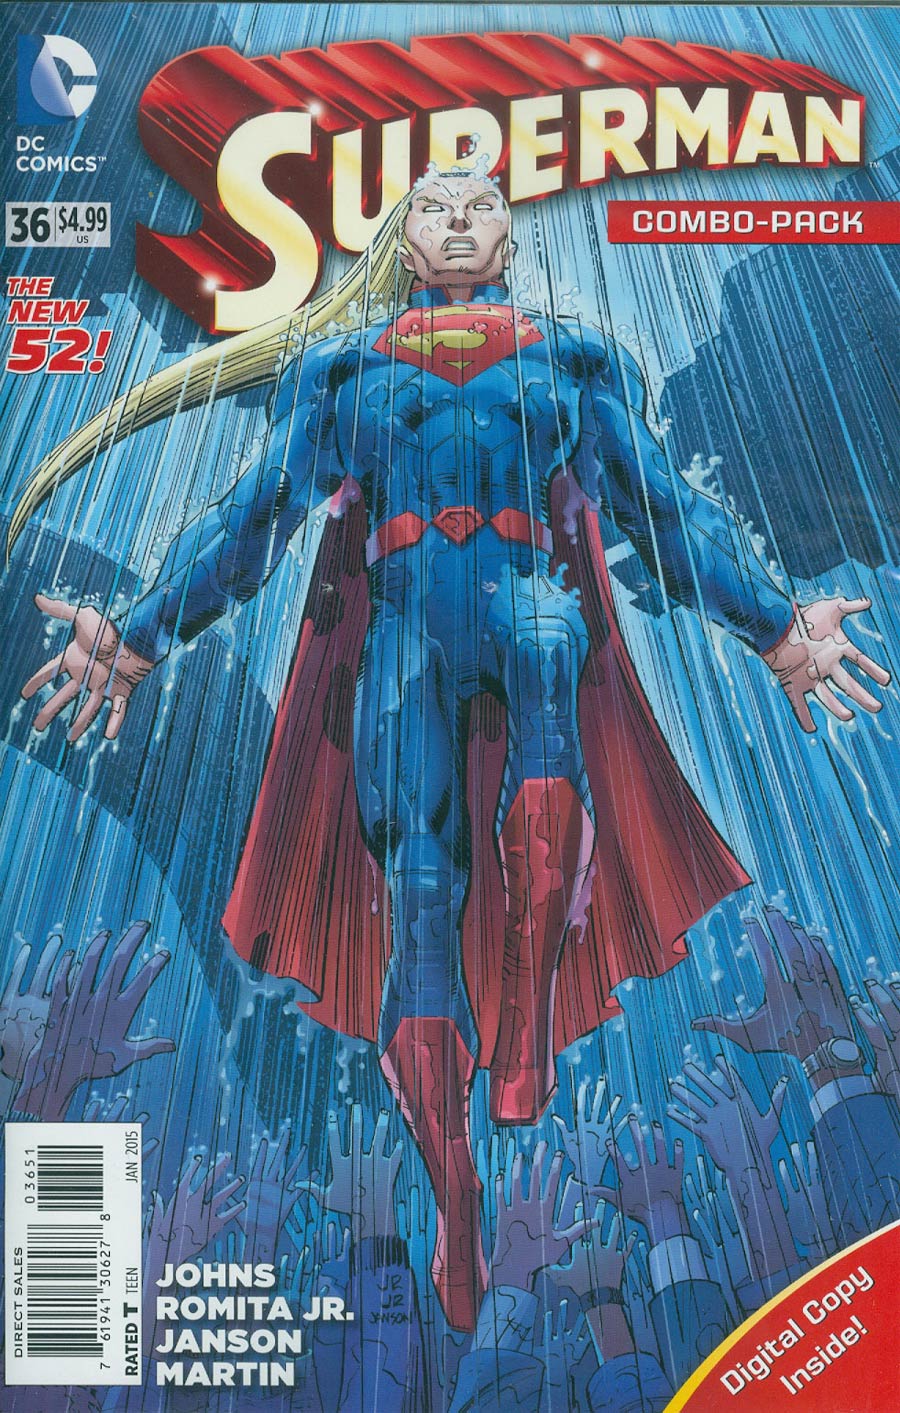 Superman Vol 4 #36 Cover C Combo Pack With Polybag